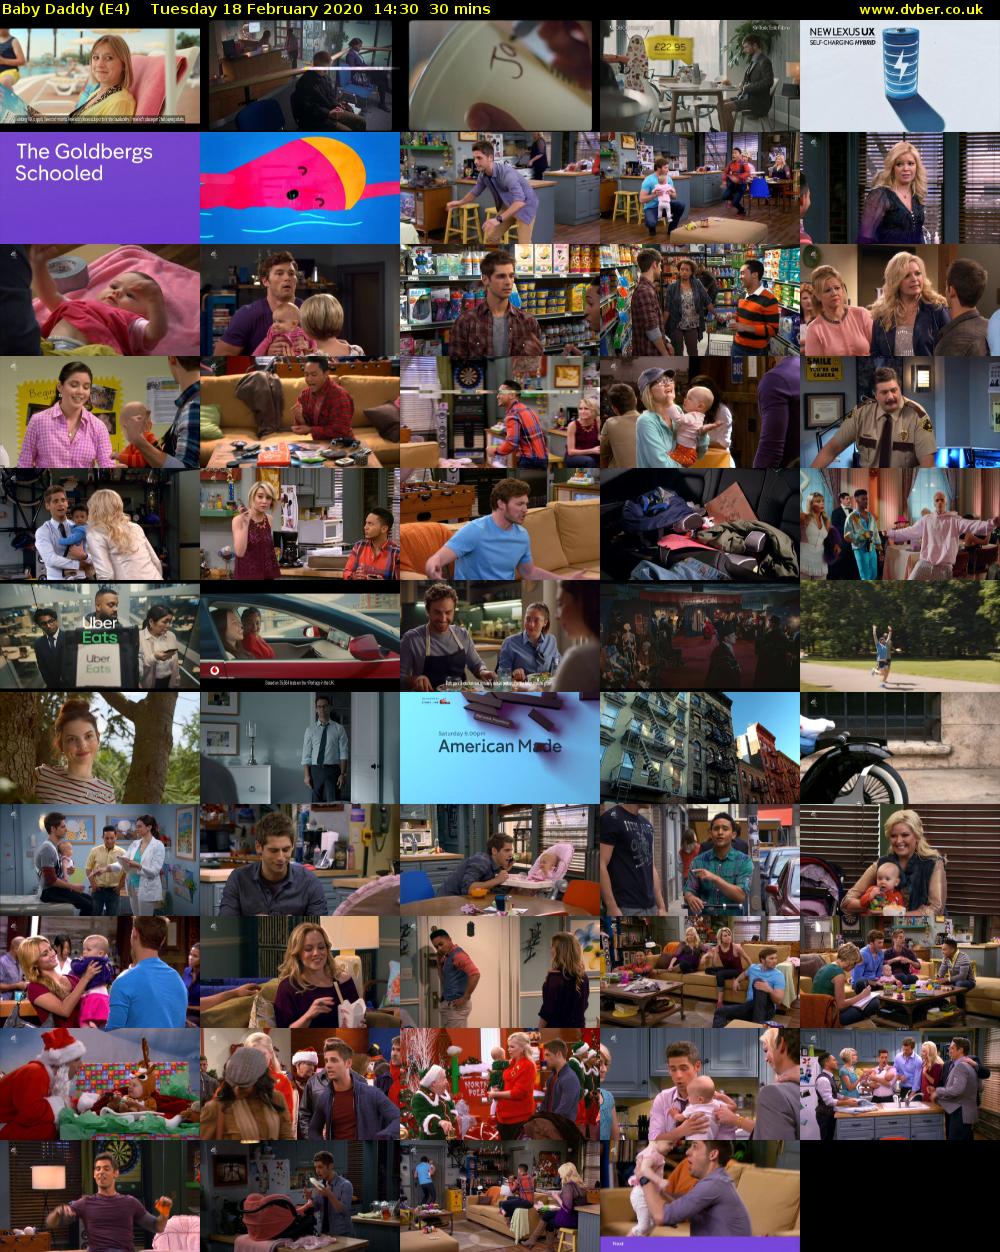 Baby Daddy (E4) Tuesday 18 February 2020 14:30 - 15:00